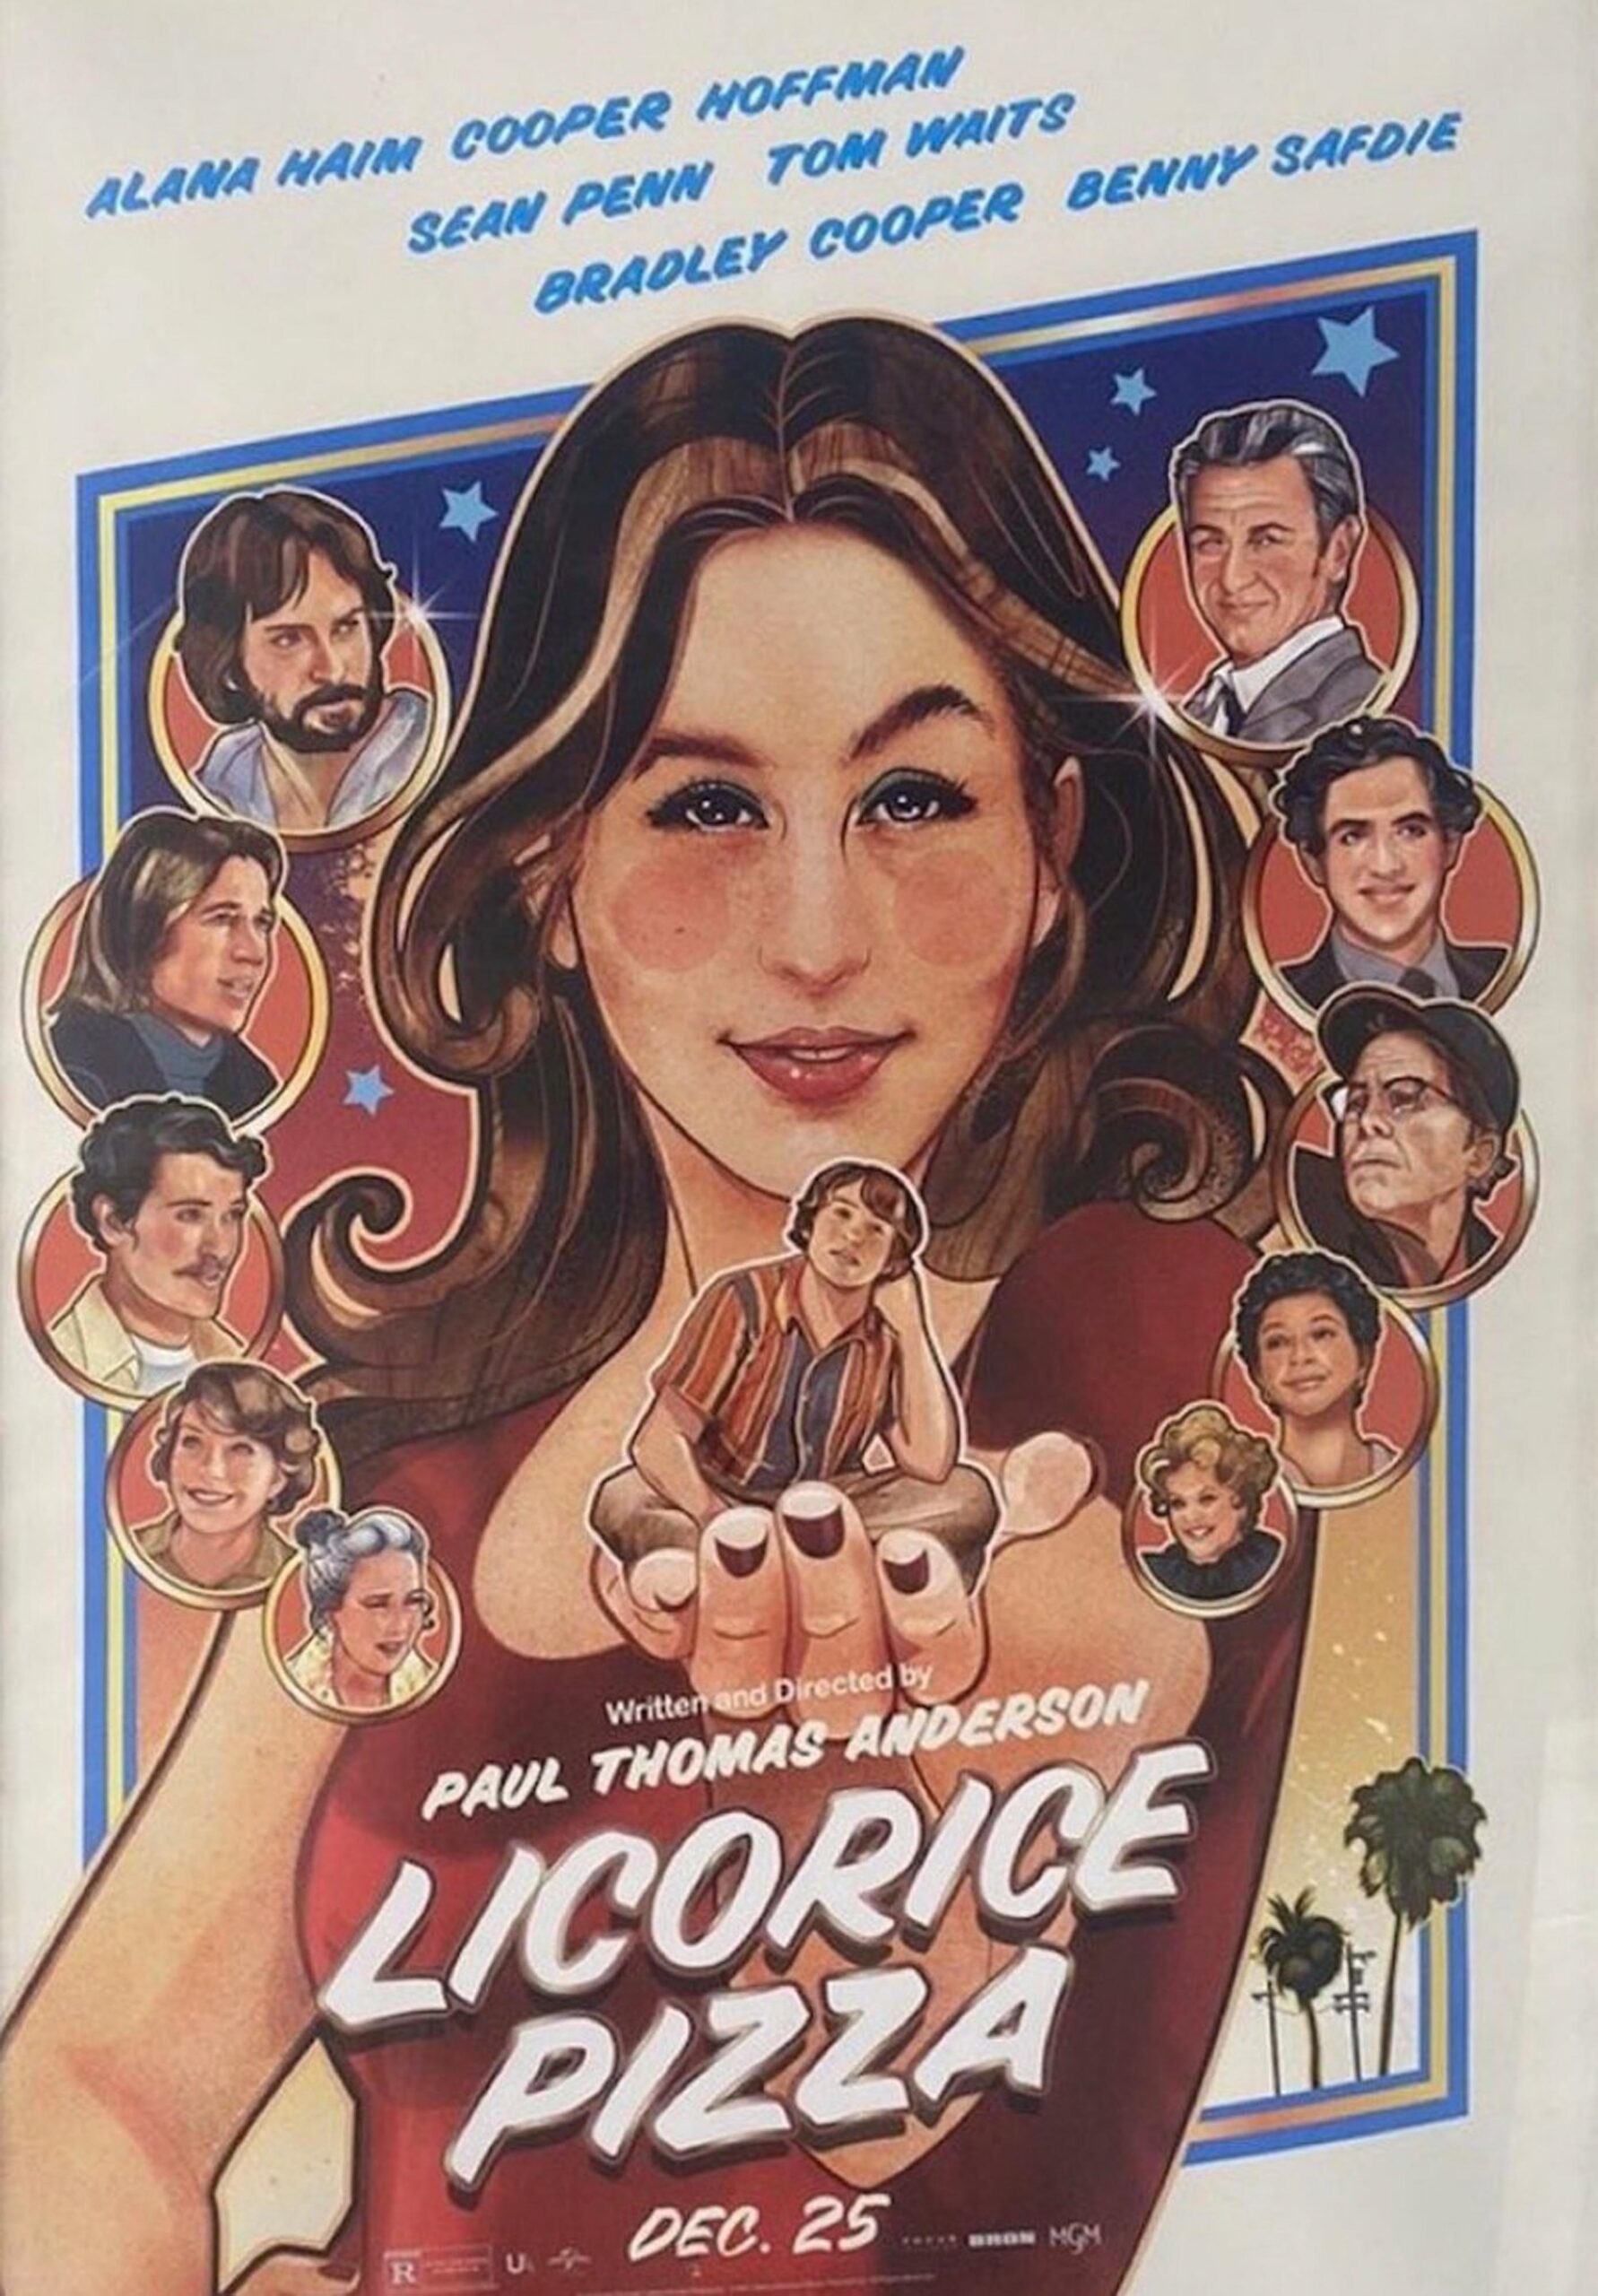 Licorice Pizza - Boogie Nights-vibe? (SF Studios/Universal Pictures)